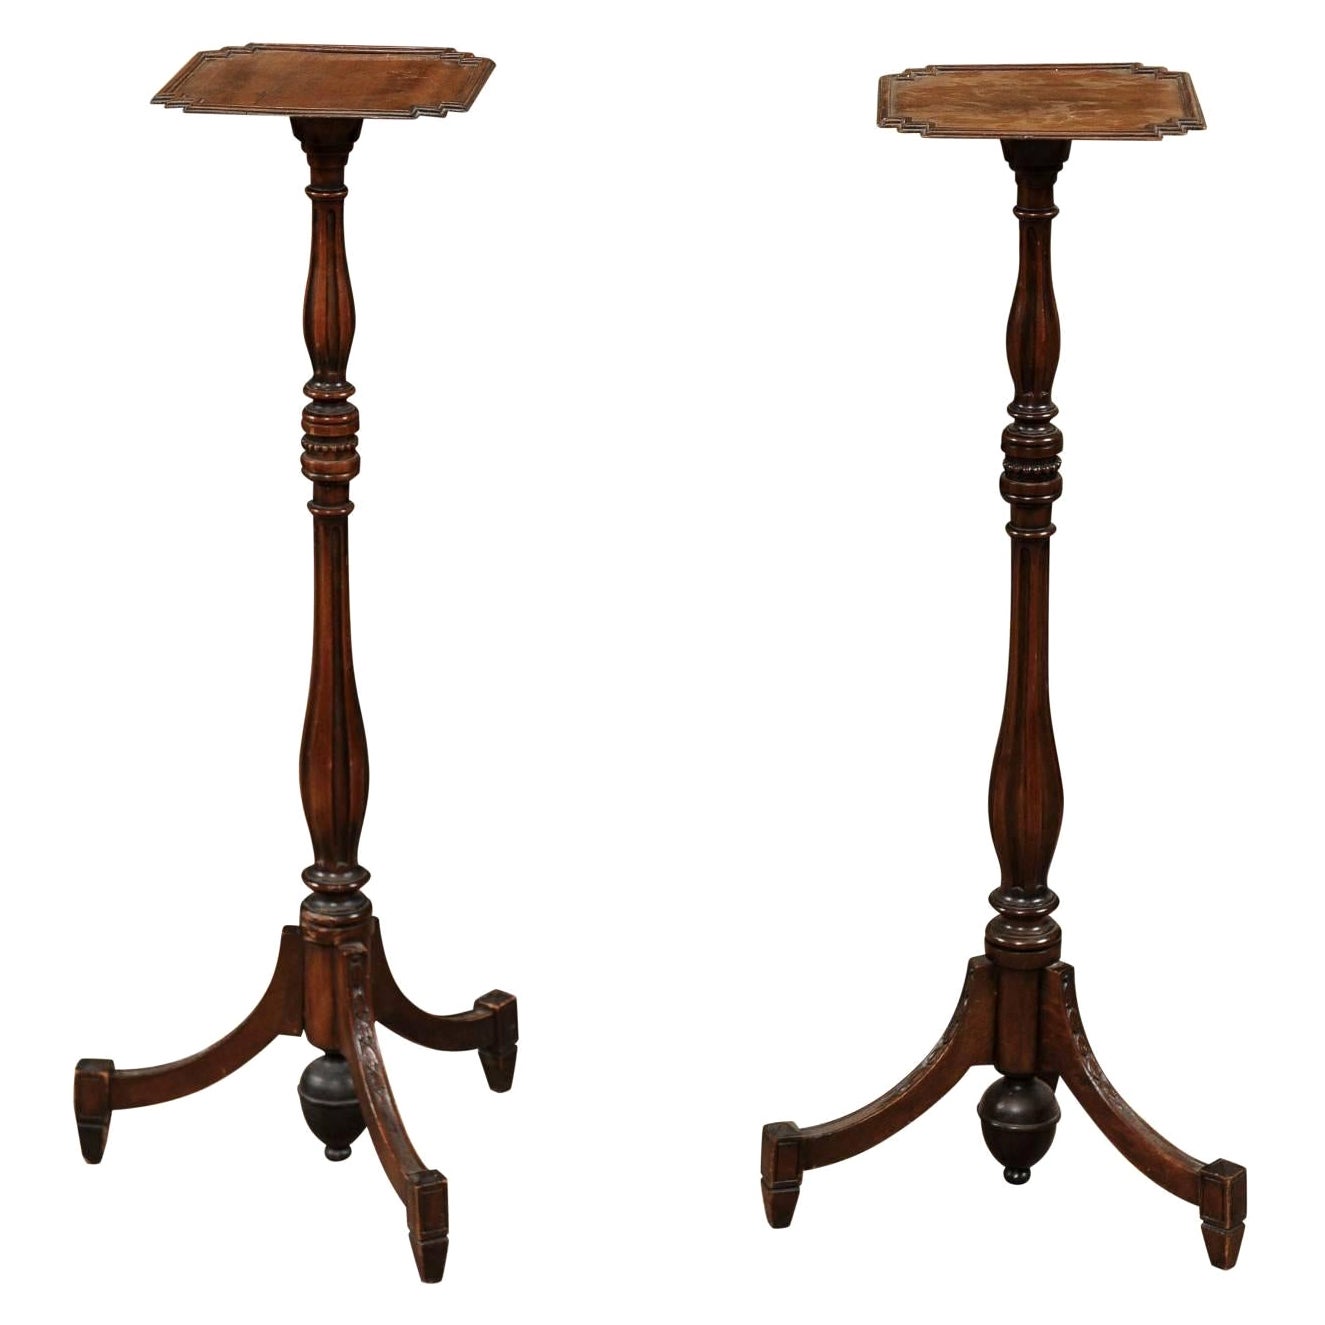 Pair of English George IV Style Mahogany Candle Stands, Late 19th/Early 20th C For Sale